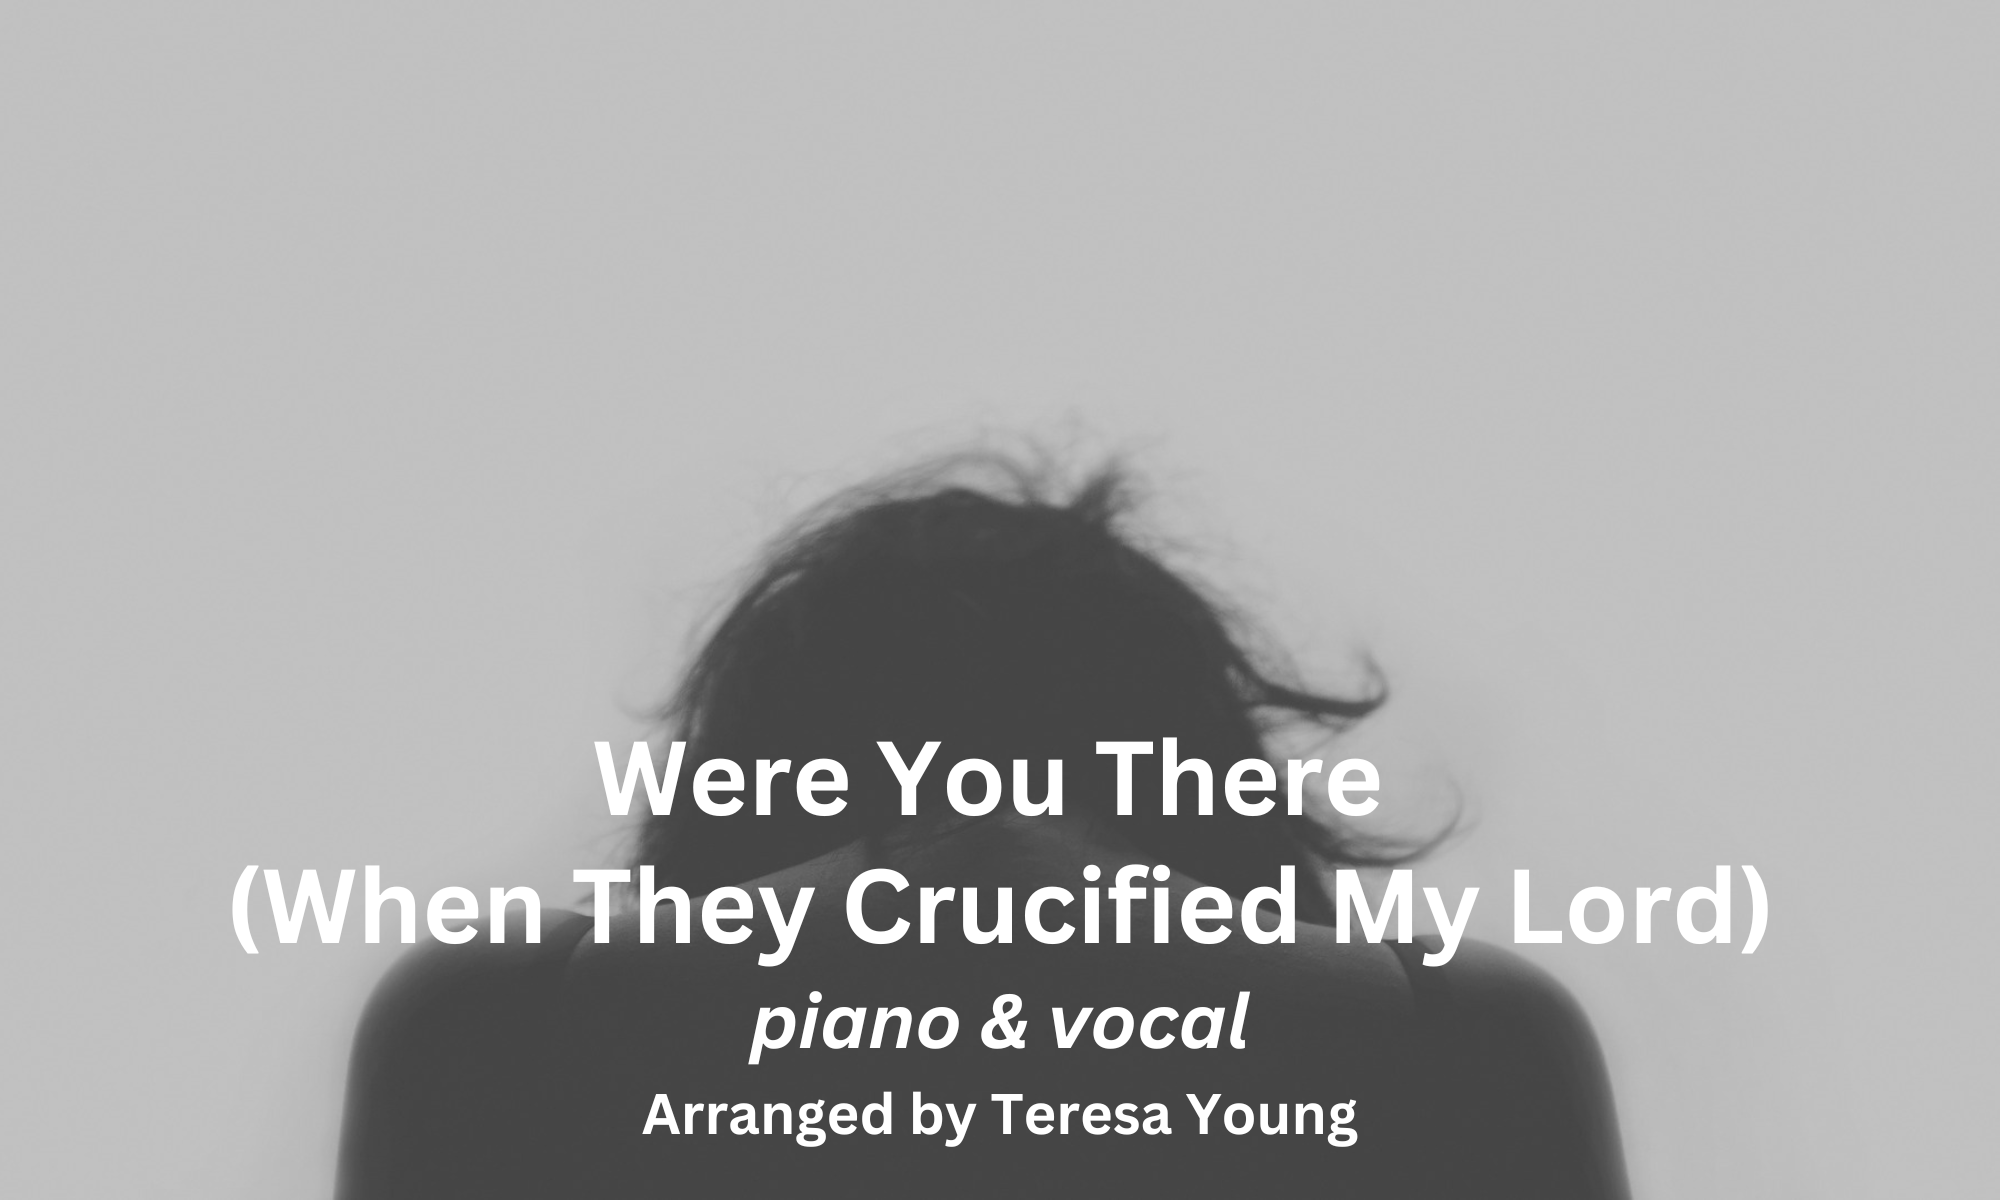 Were You There (When They Crucified My Lord), piano & vocal, arr. Teresa Young